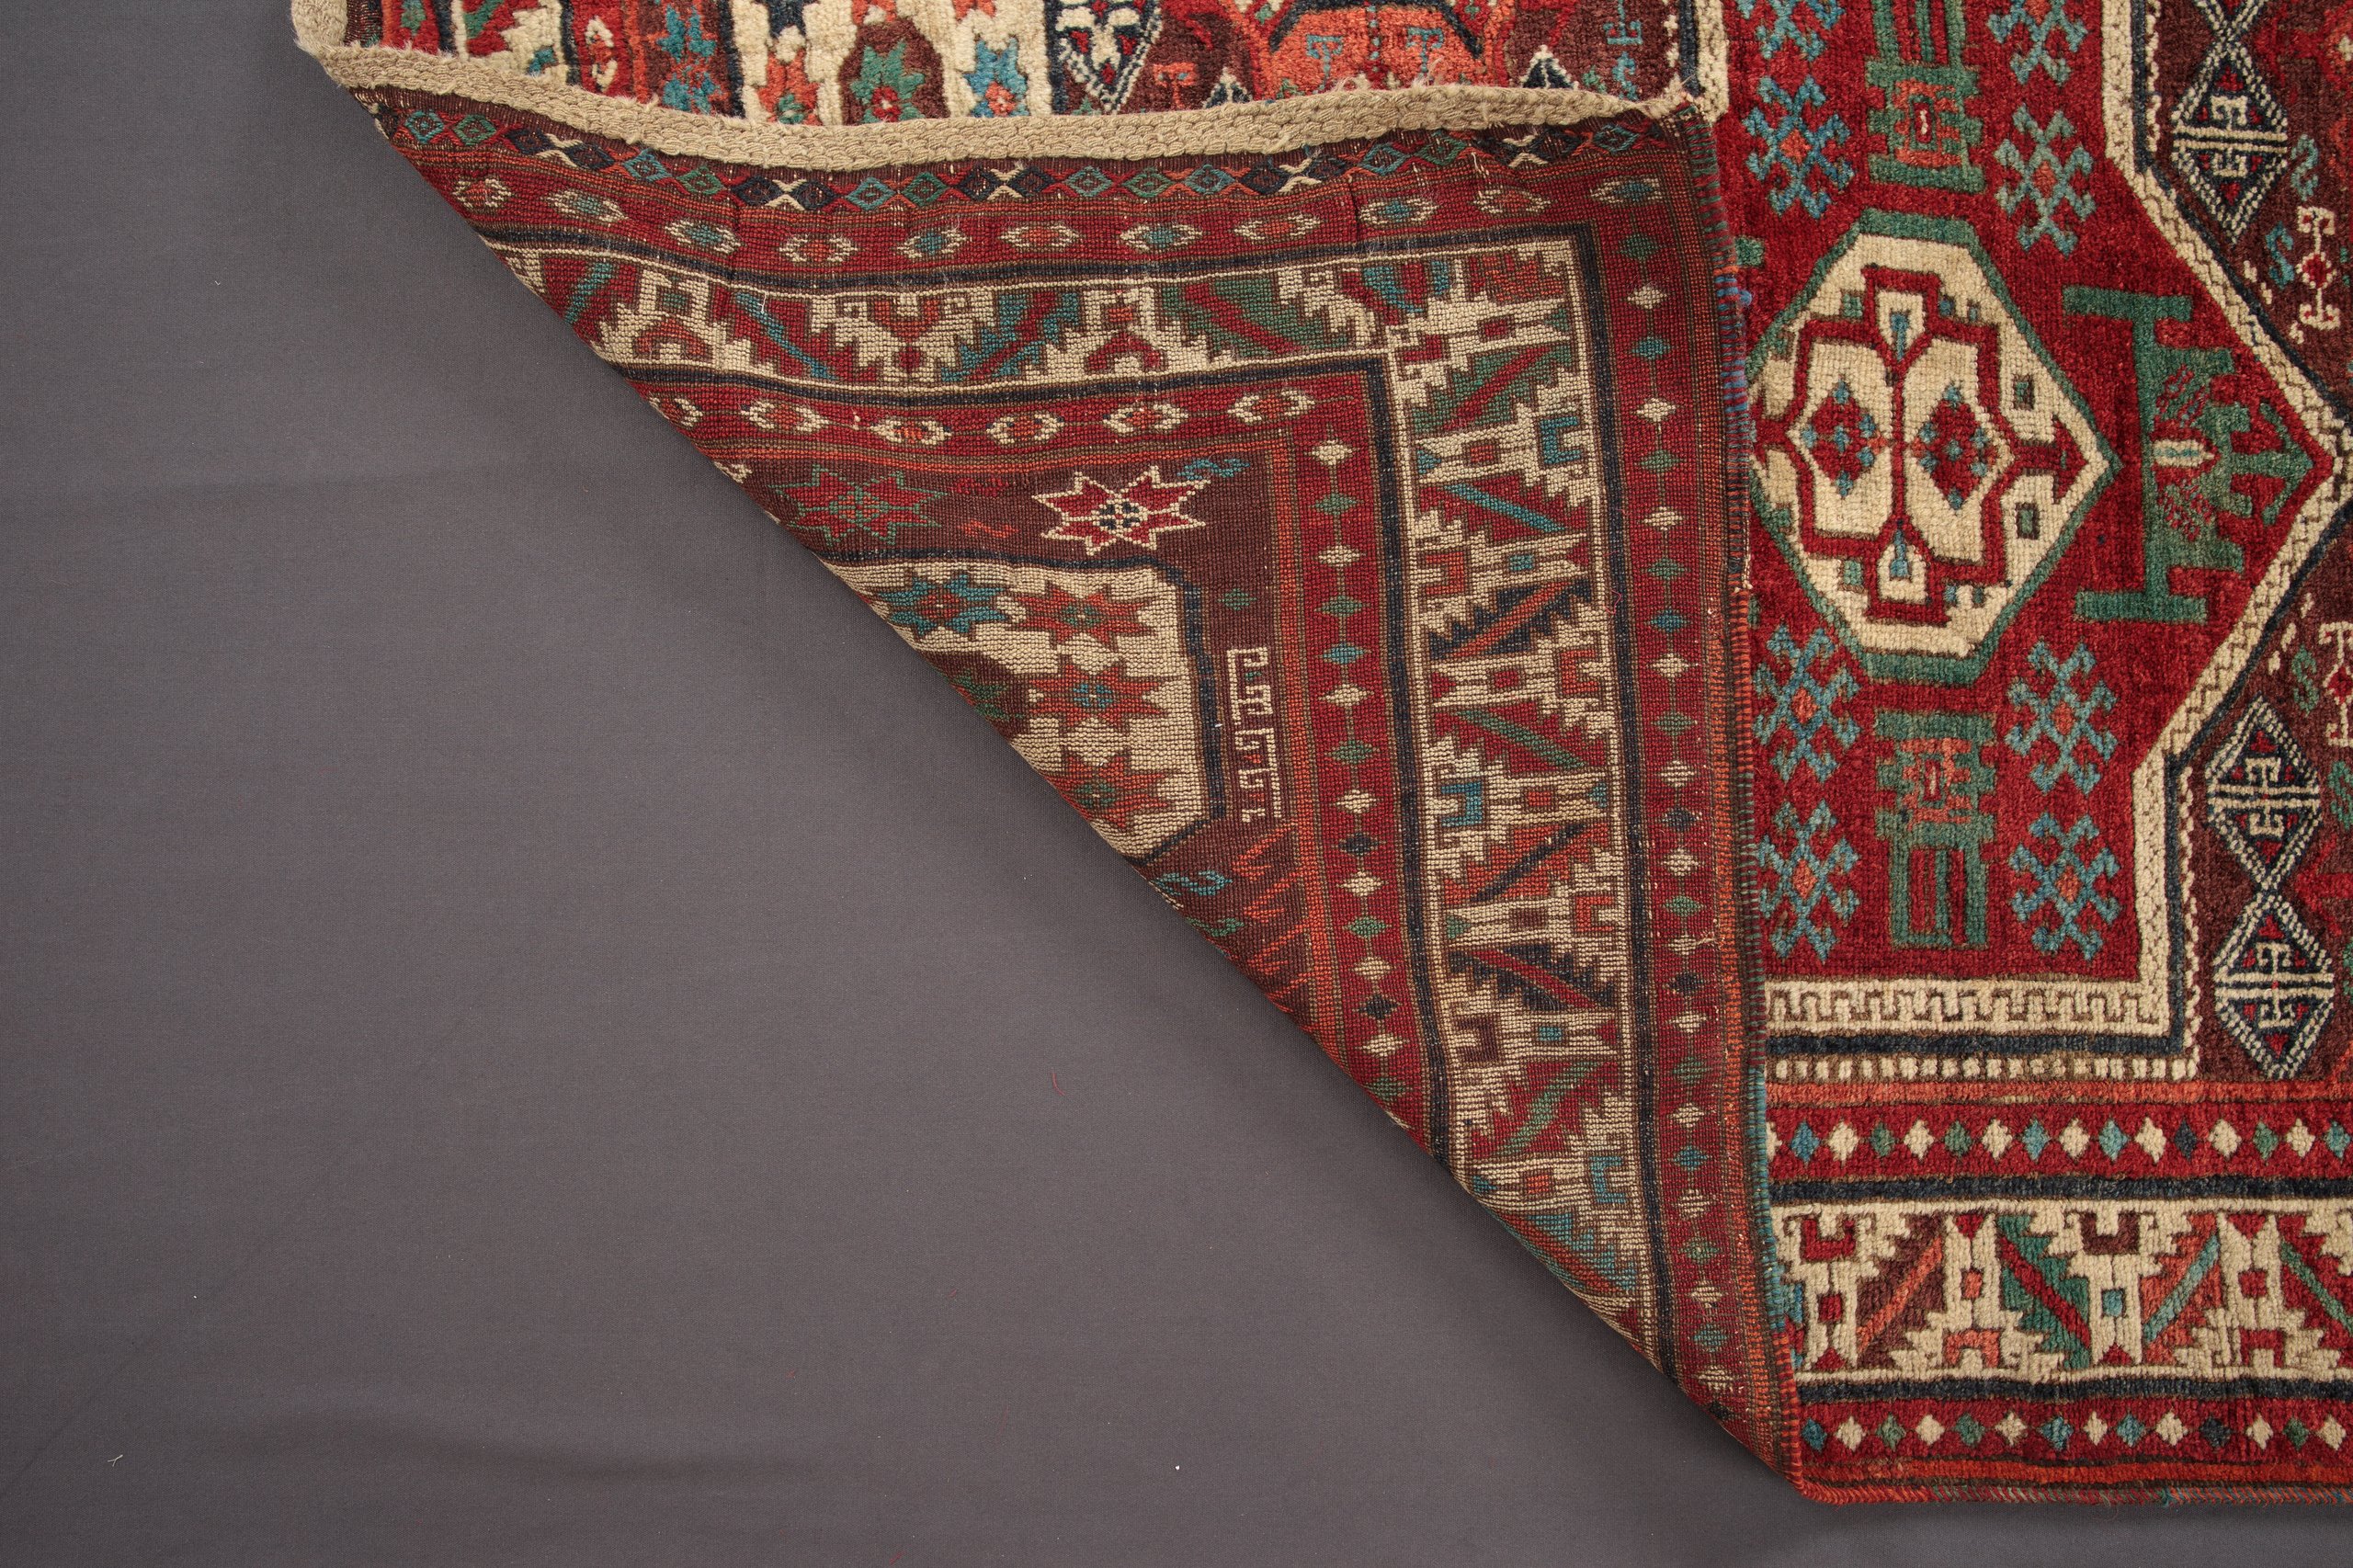 Knotted pile rug from eastern Anatolia